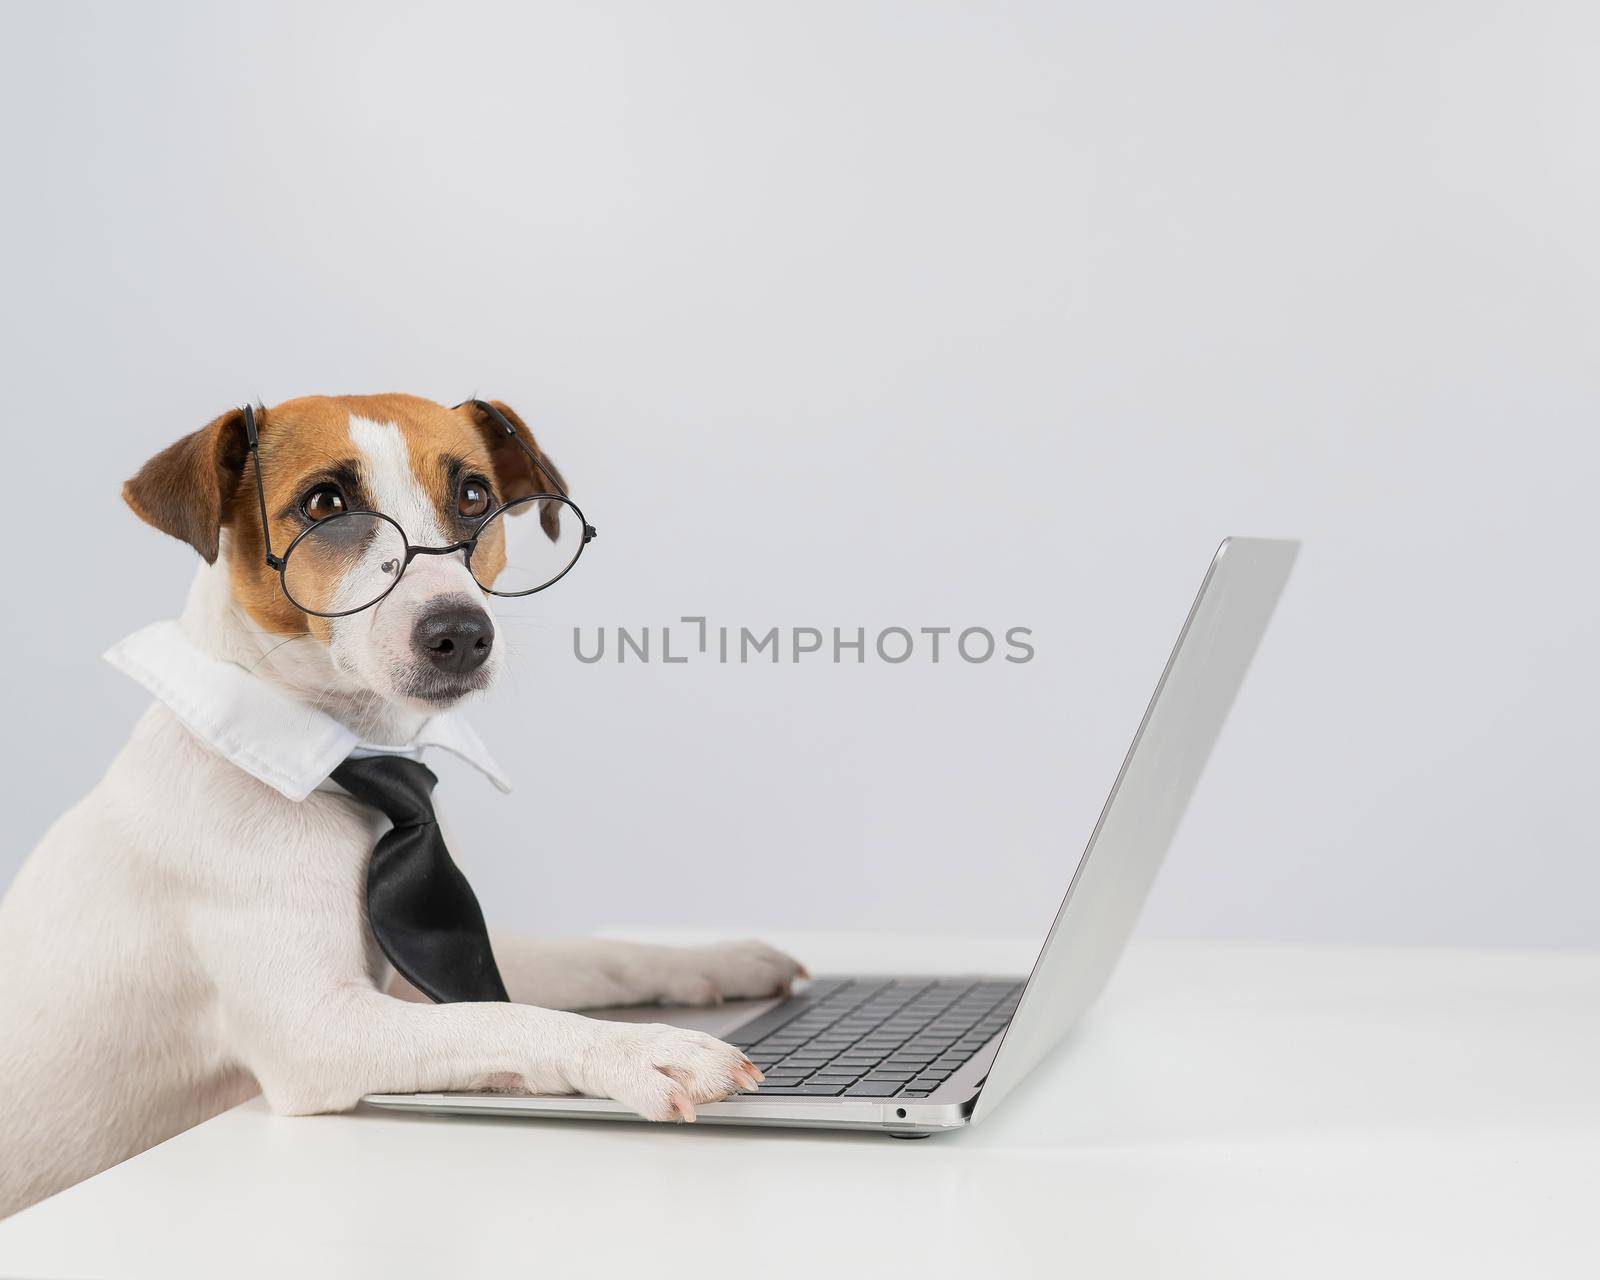 Jack russell terrier dog in glasses and tie works on laptop on white background